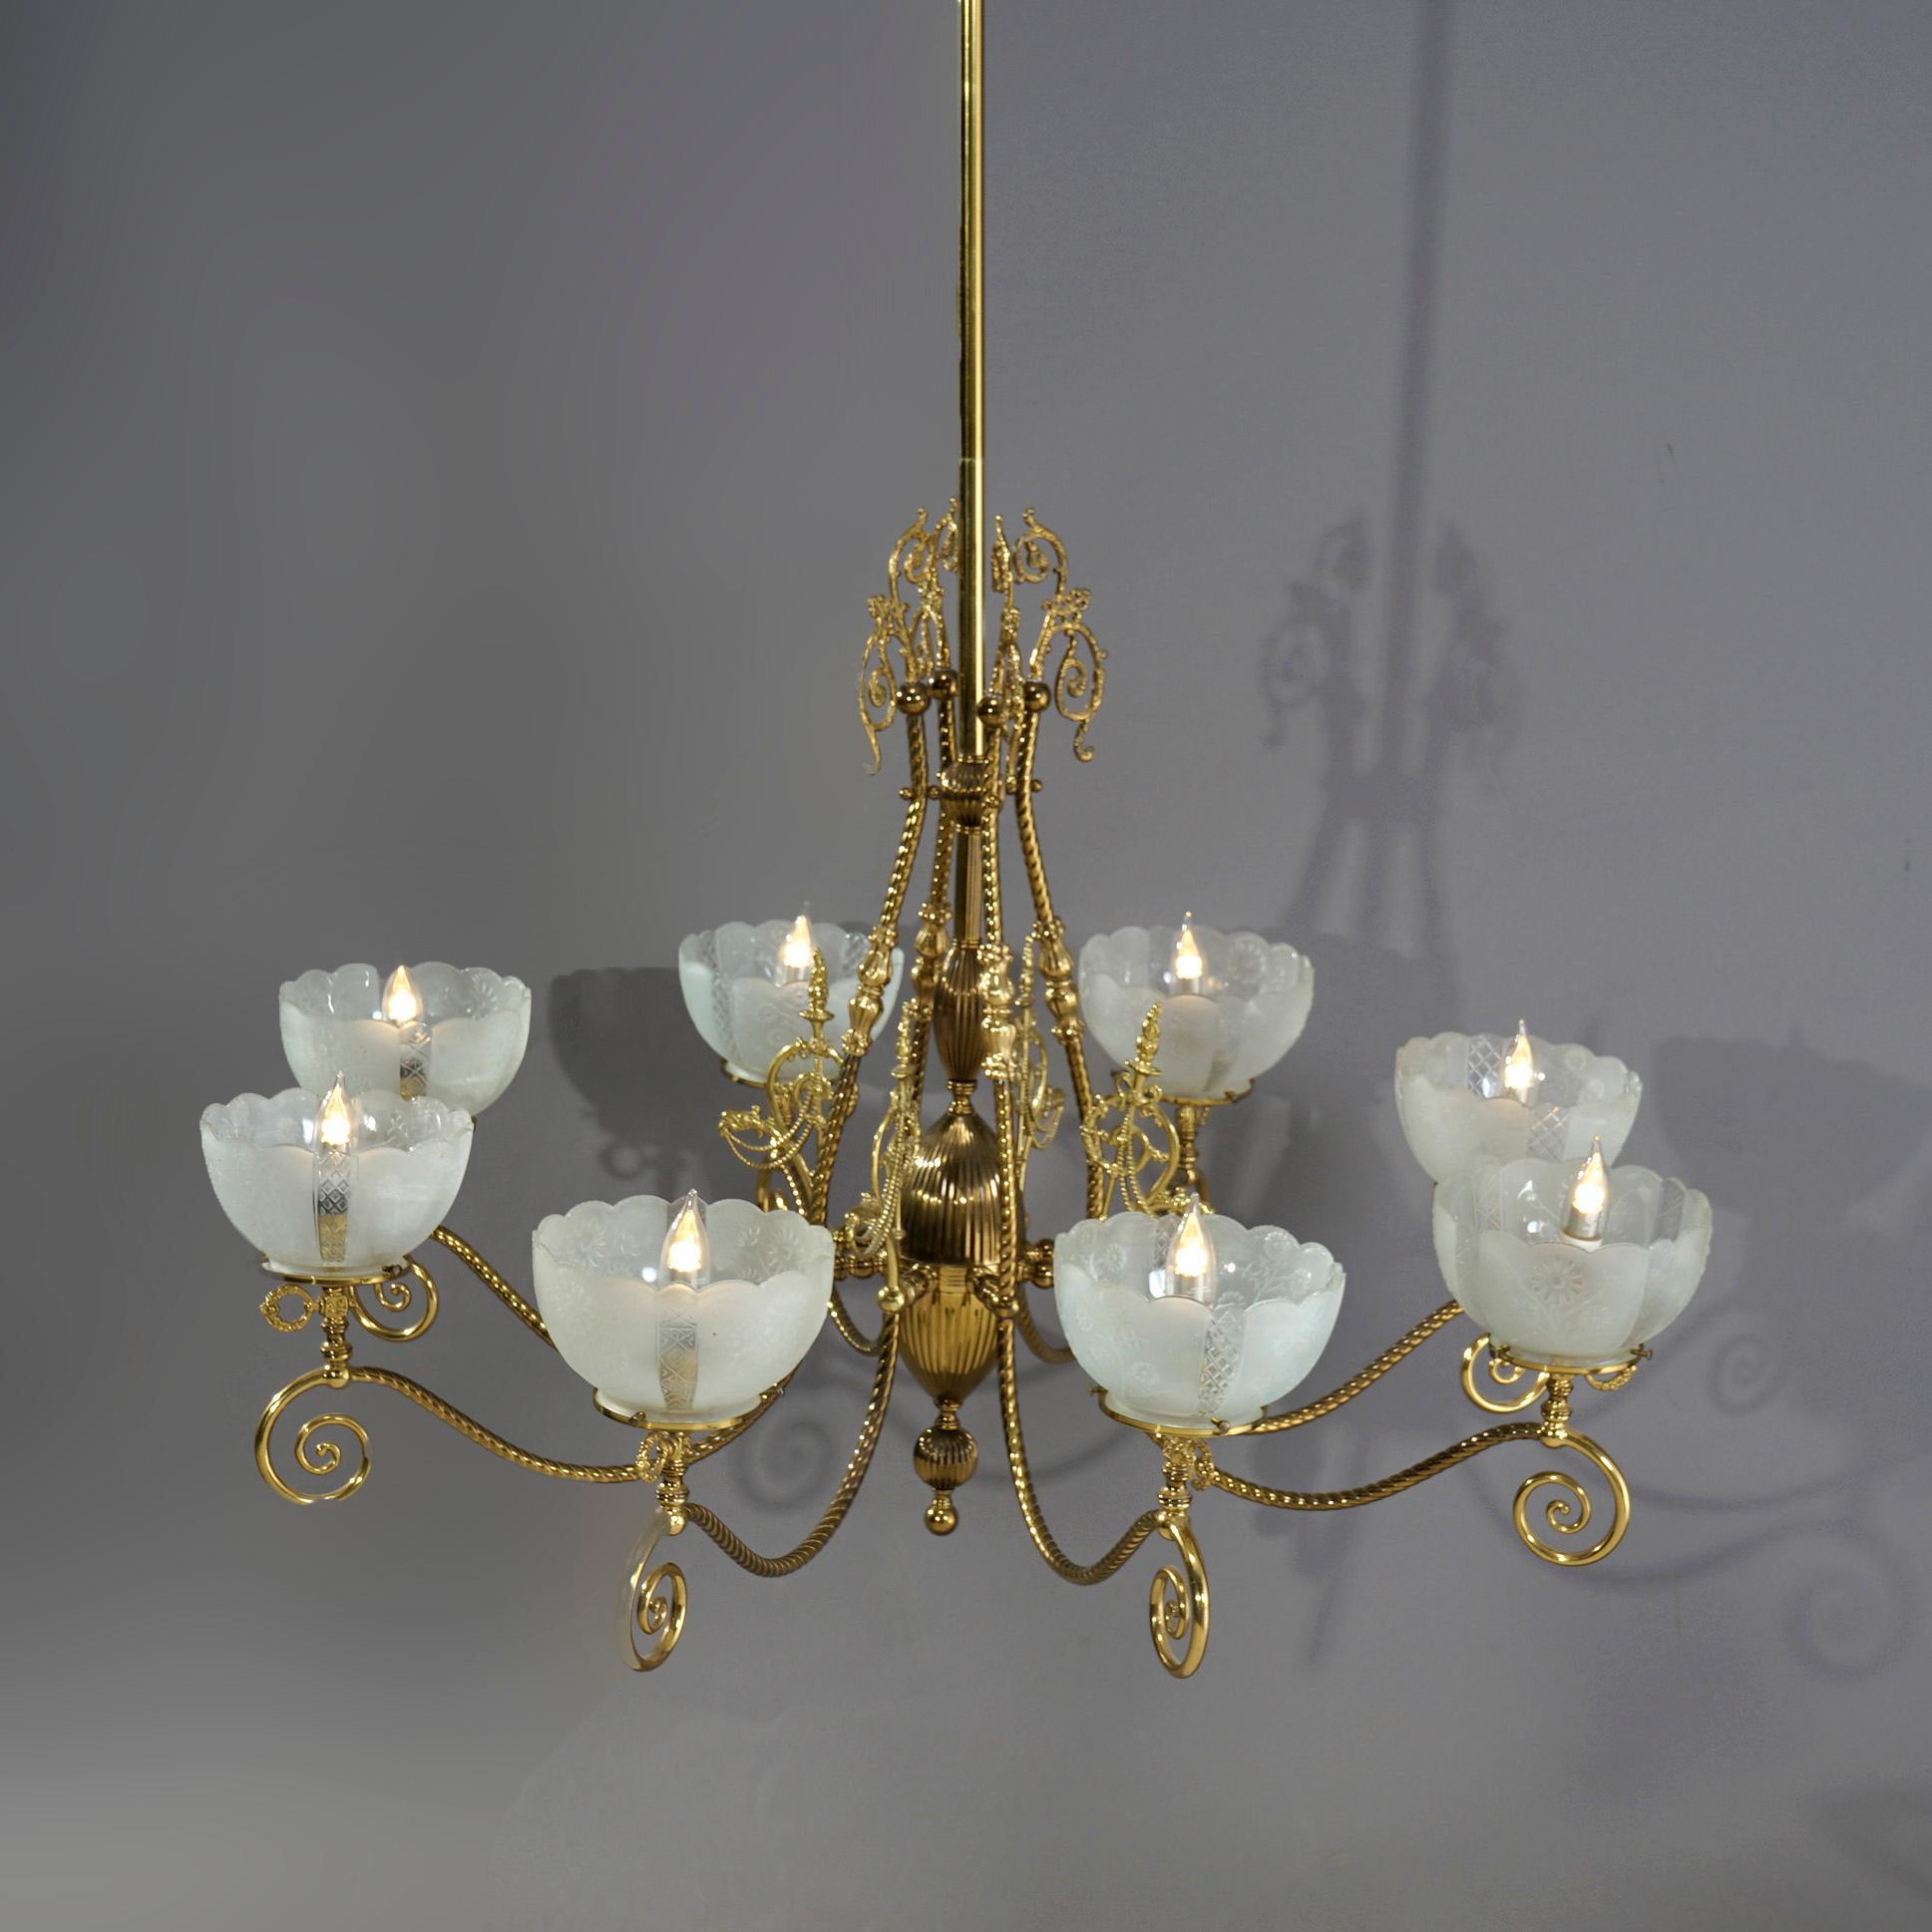 An antique and large Victorian electrified gas chandelier offers brass frame with rope twist shaft having six scroll form arms with foliate elements terminating in etched glass shades (non-matching), c1890

Measures- 82.5''H x 43''W x